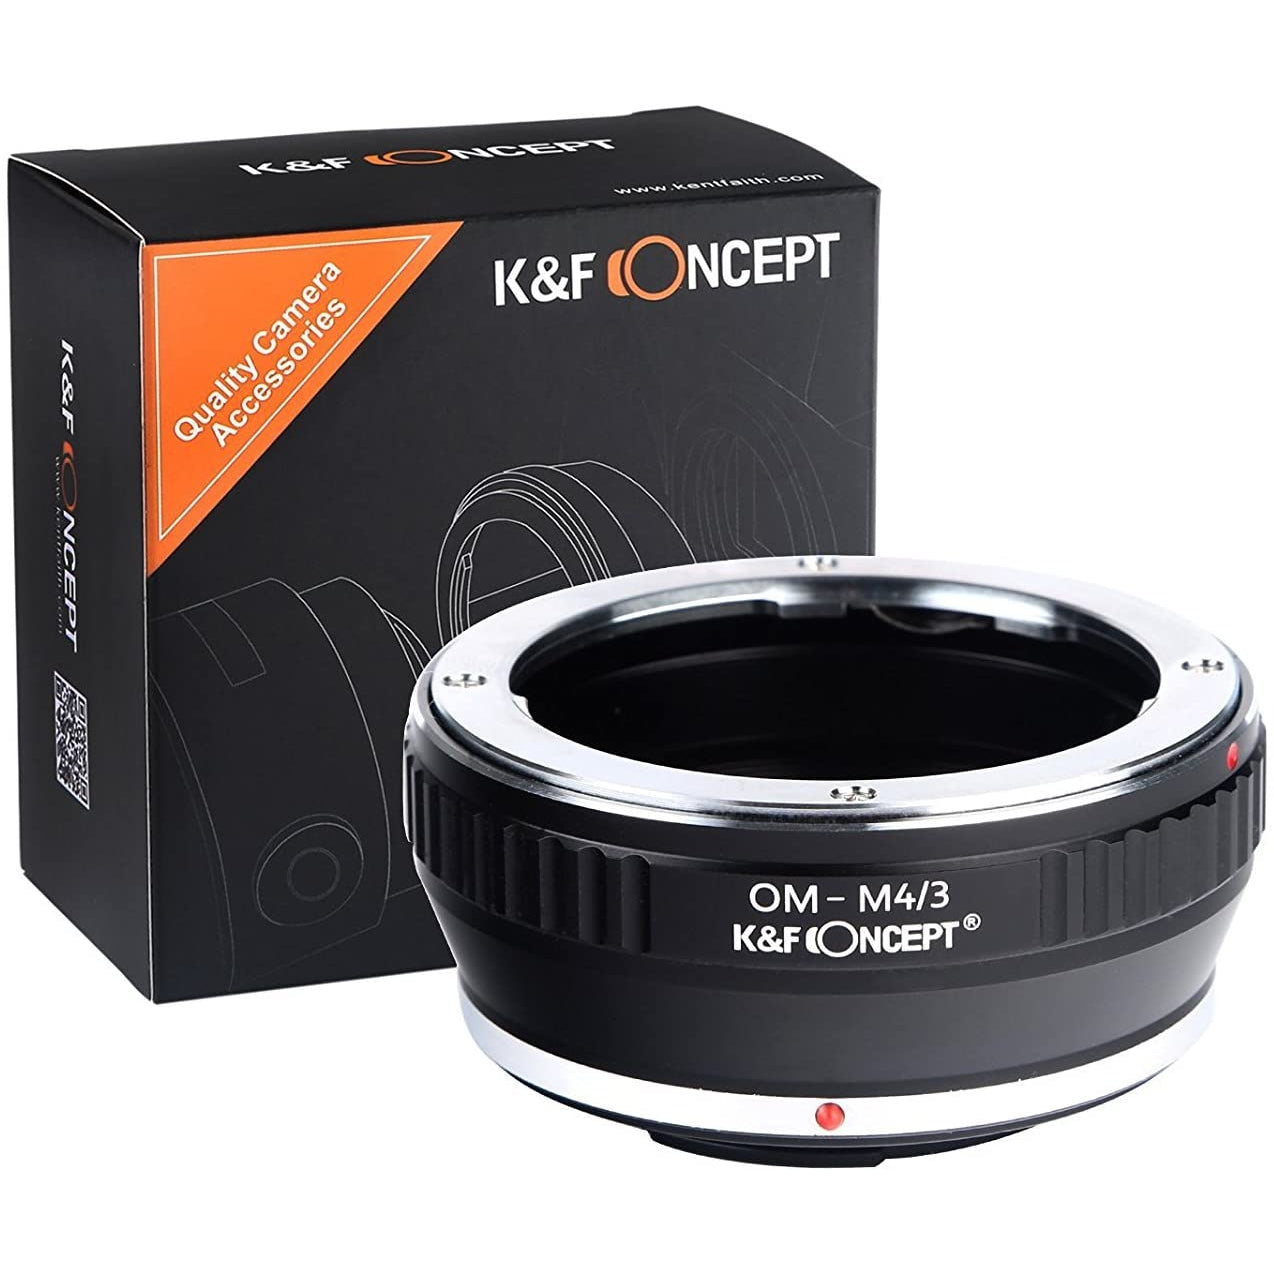 K&F Concept OM to Micro 4/3 Adapter, Manual Lens Mount Adapter OM-M4/3